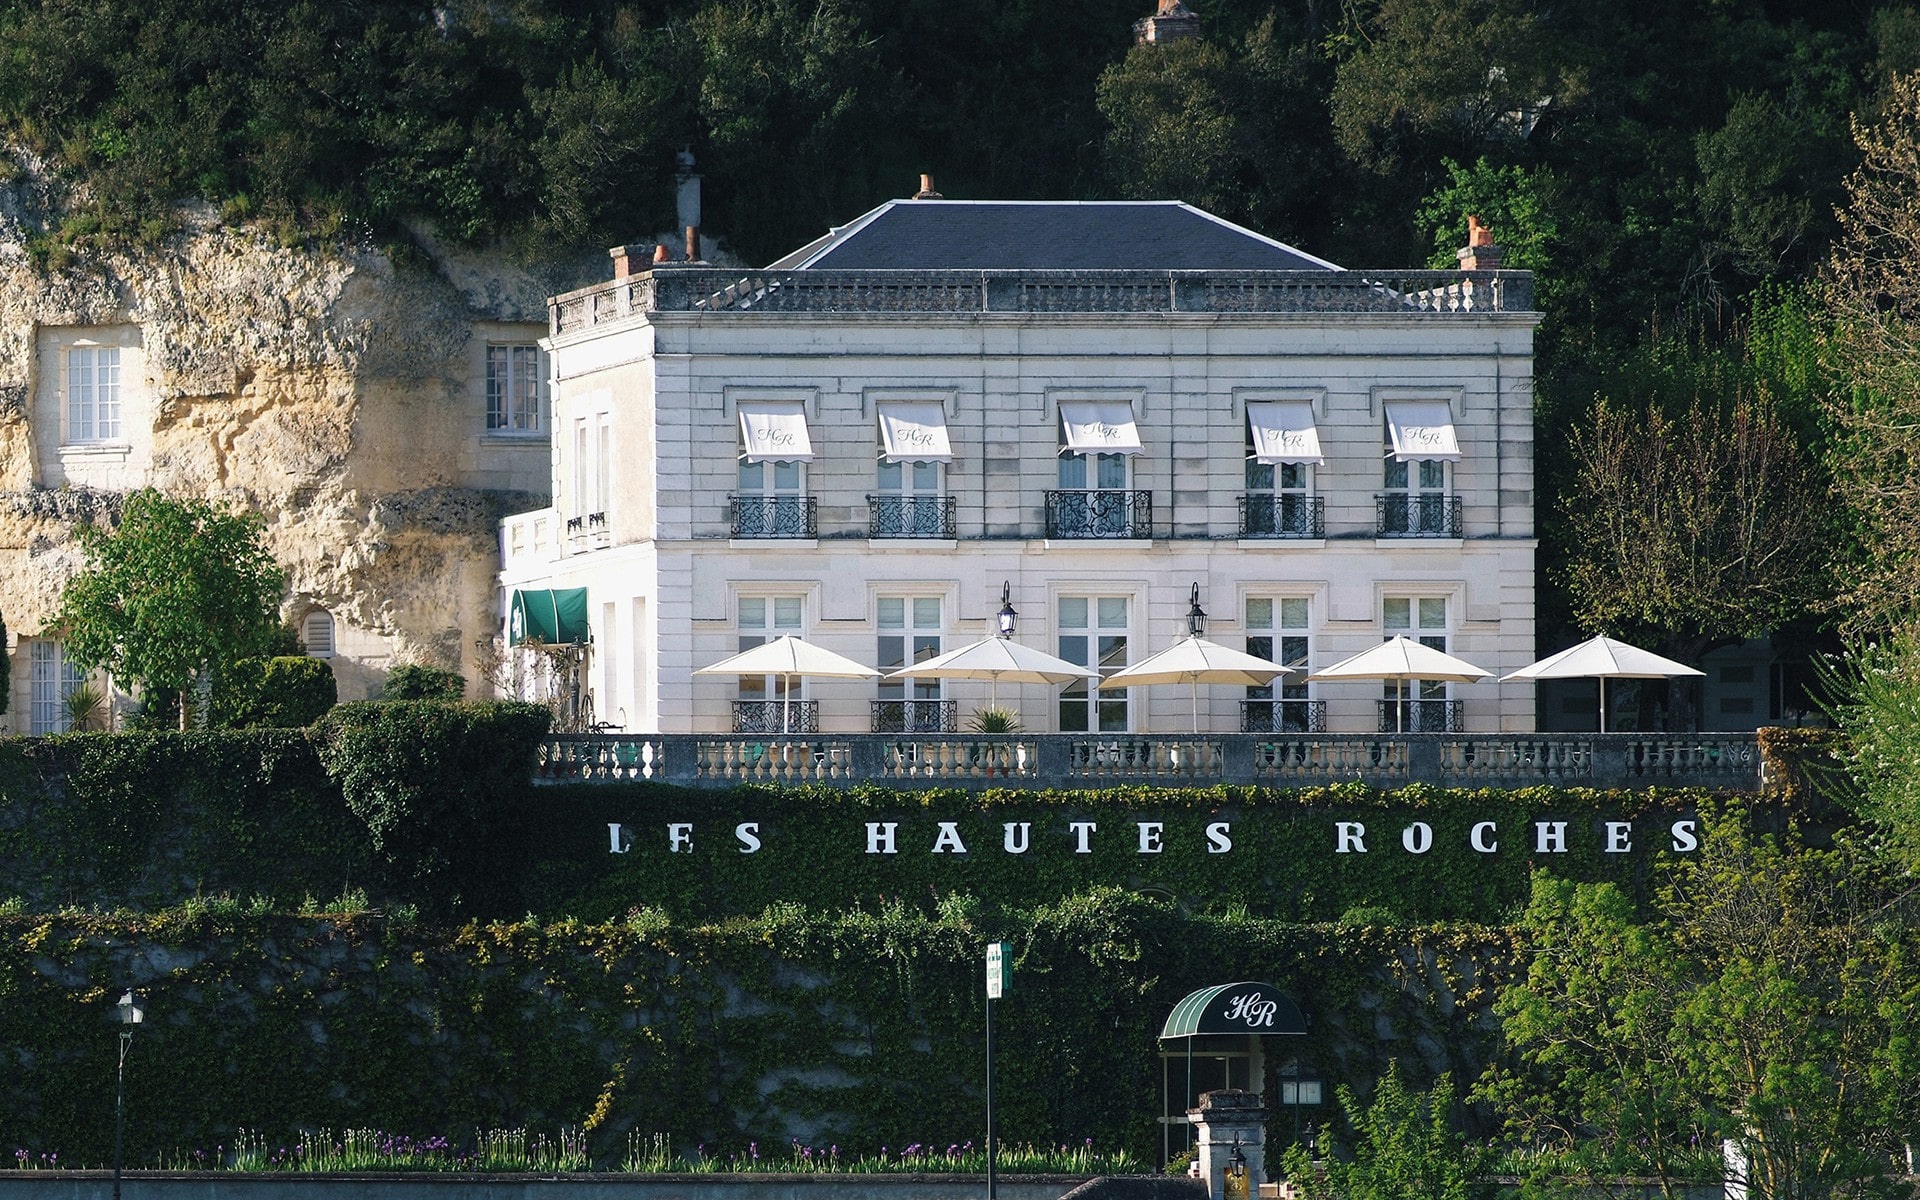 This is an image of the Hautes Roches Hotel